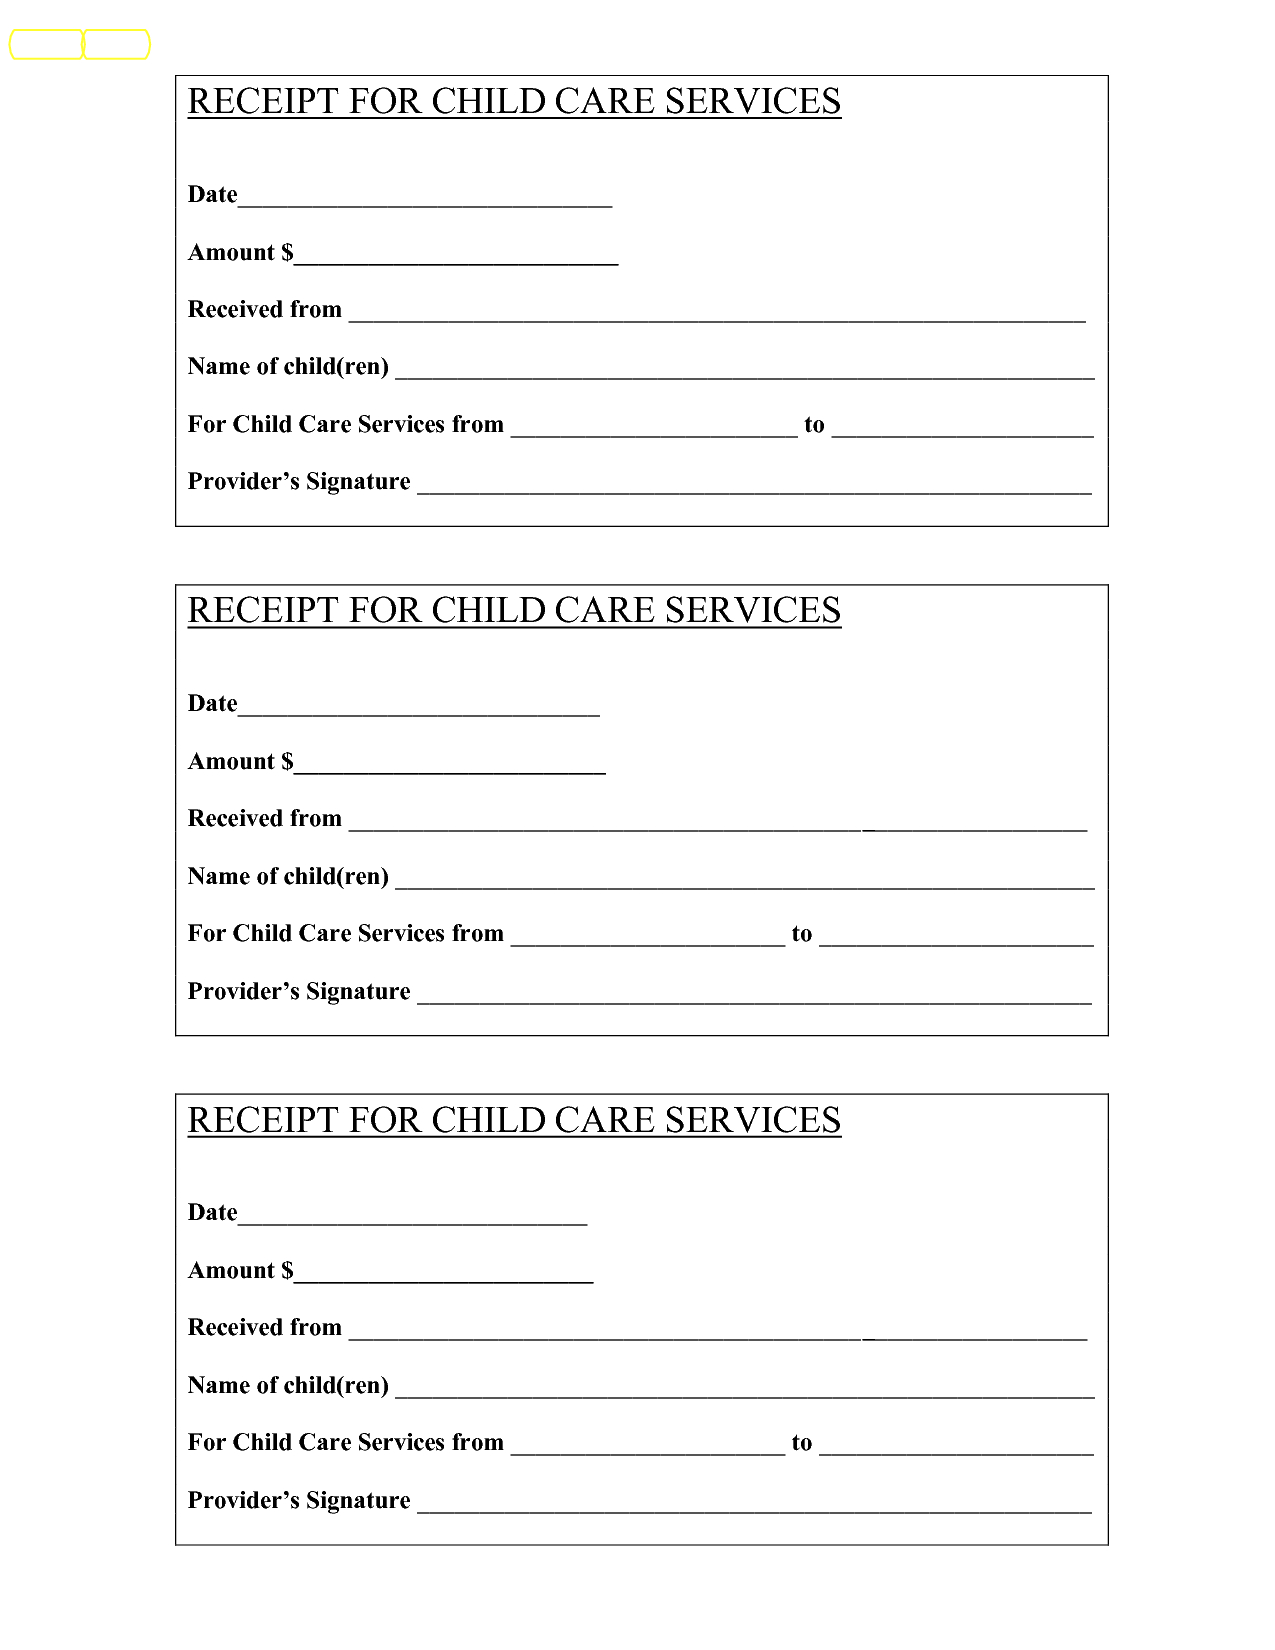 Babysitting Receipt - Bing Images | Baby | Child Care Services - Free Printable Daycare Receipts